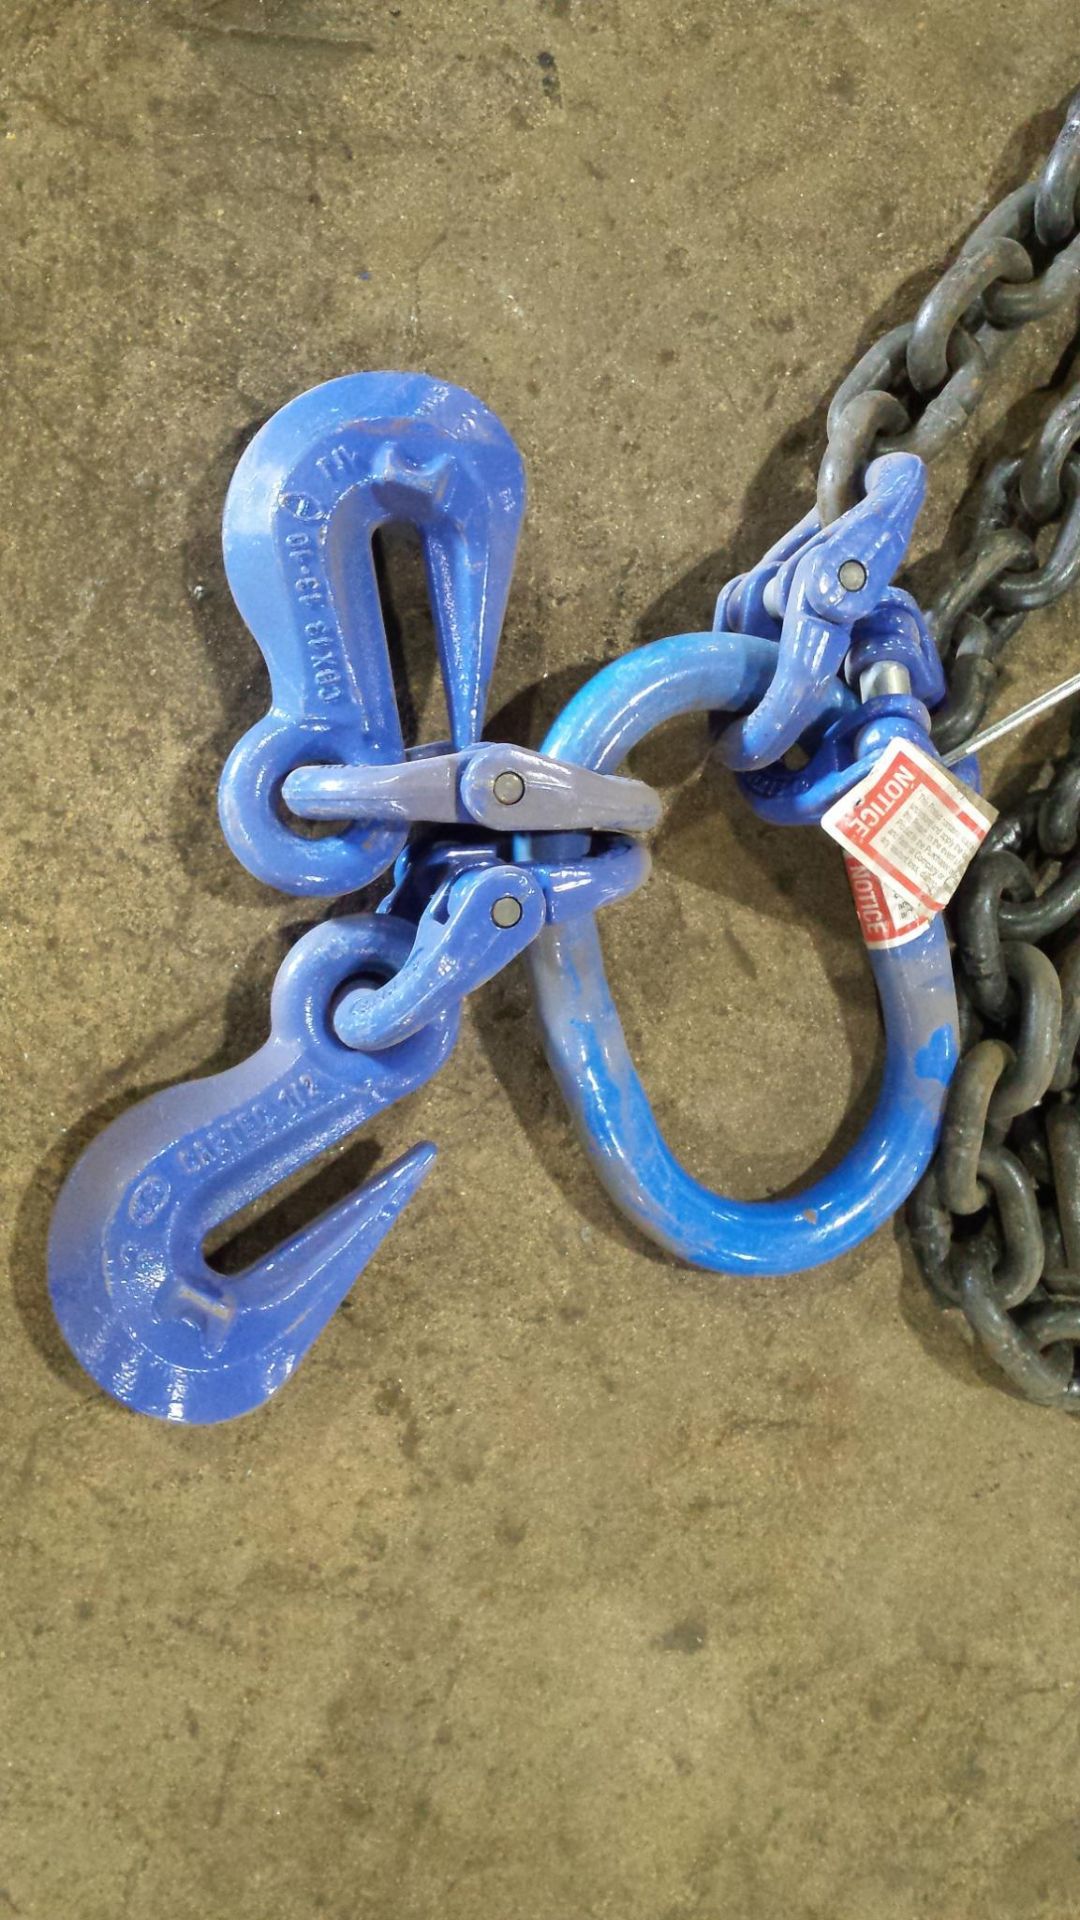 Cartec 11 foot chain and hooks, size 1/2, 26,000 lb capacity, grade 100 - Image 2 of 5